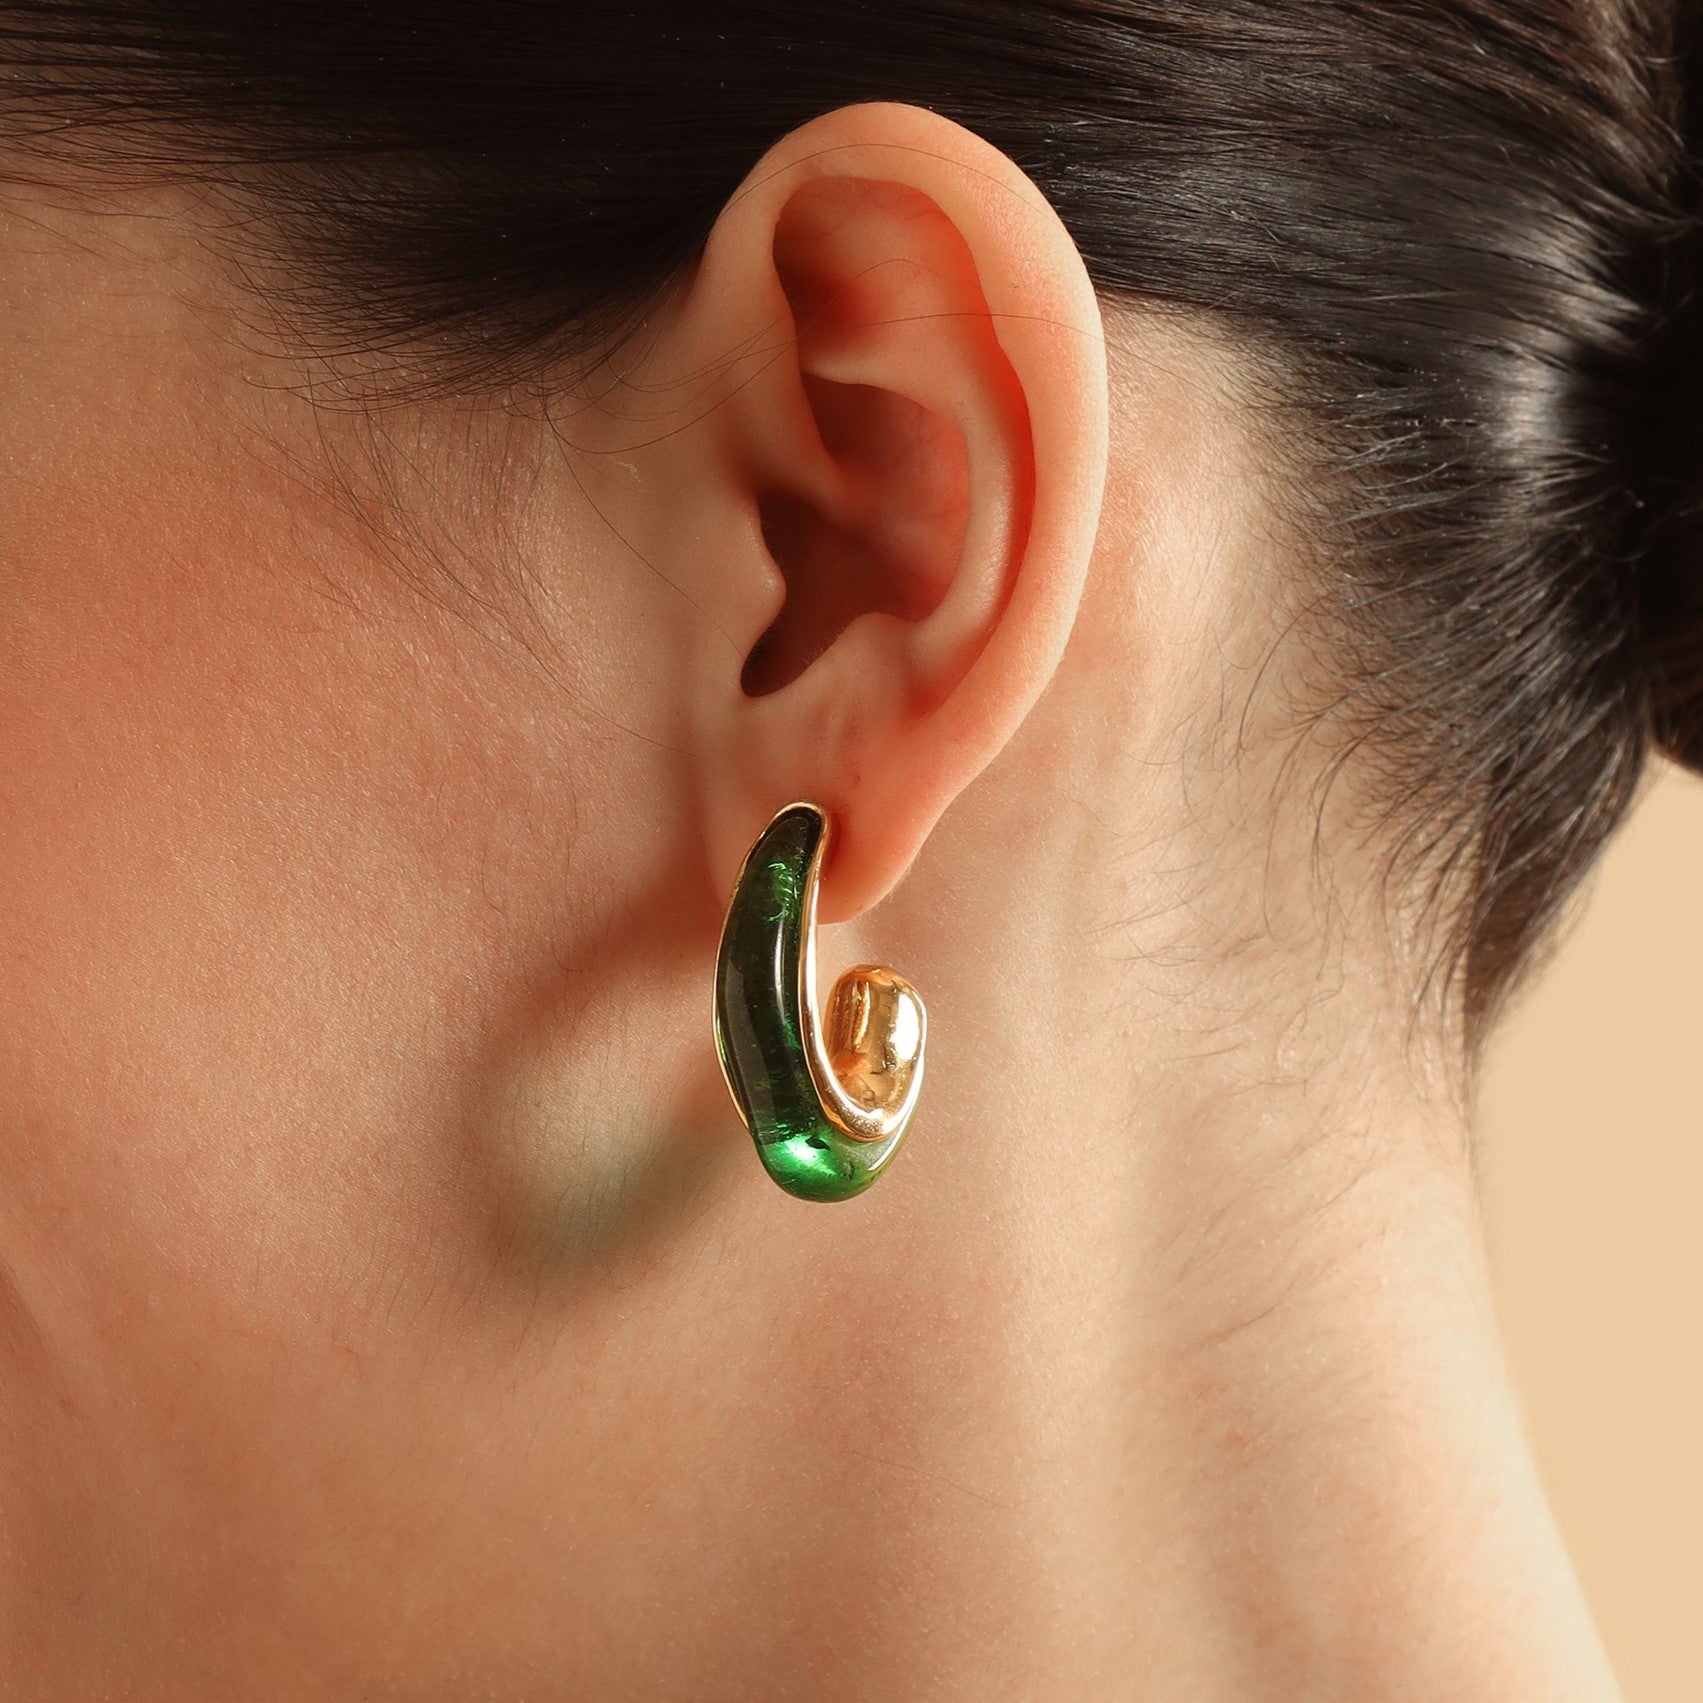 TFC Curvy Green Resin Gold Plated Hoop Earrings- Discover daily wear gold earrings including stud earrings, hoop earrings, and pearl earrings, perfect as earrings for women and earrings for girls.Find the cheapest fashion jewellery which is anti-tarnis​h only at The Fun company